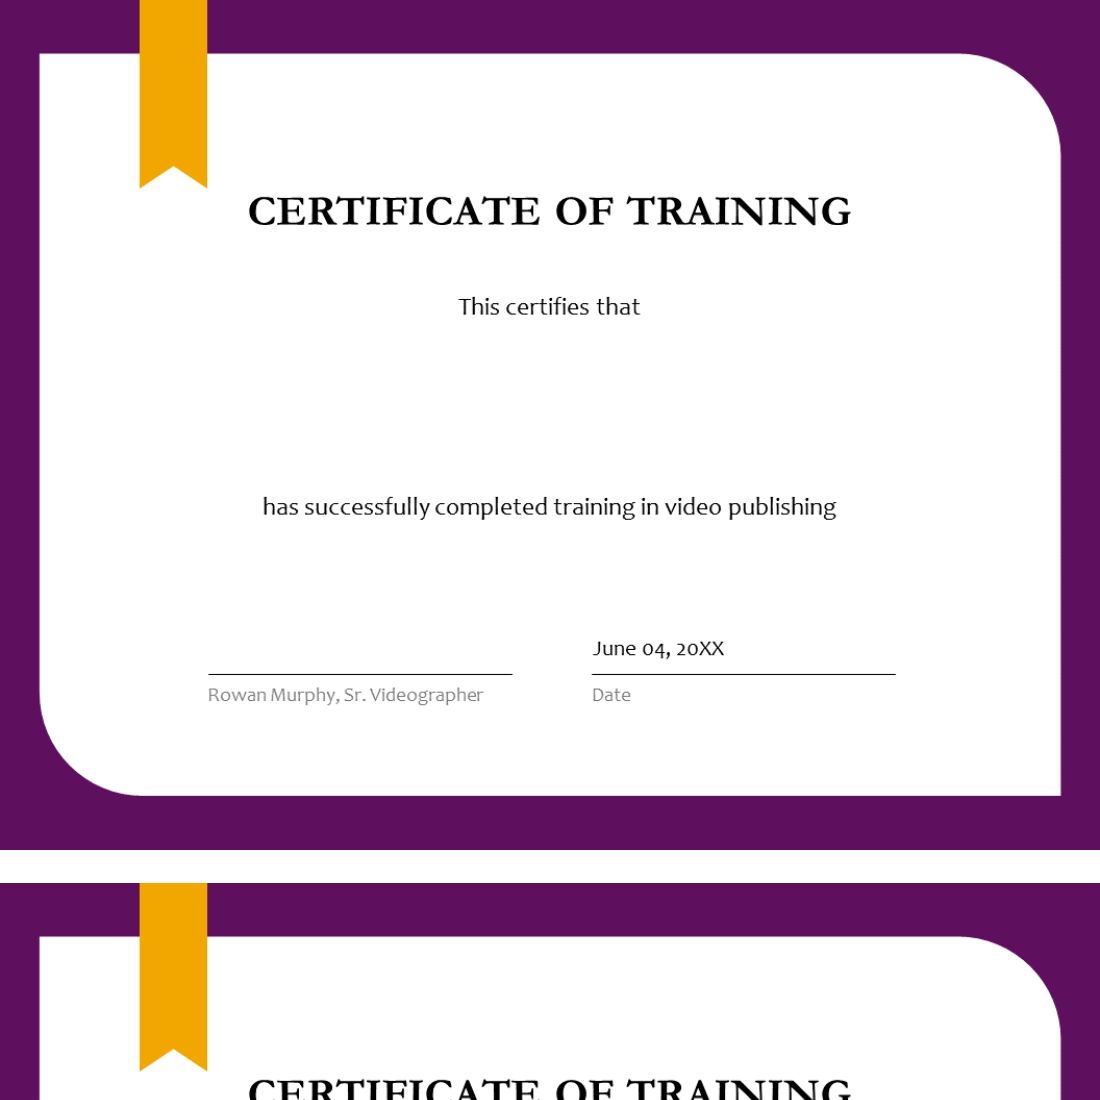 Certificate of training powerpoint presentation template cover image.